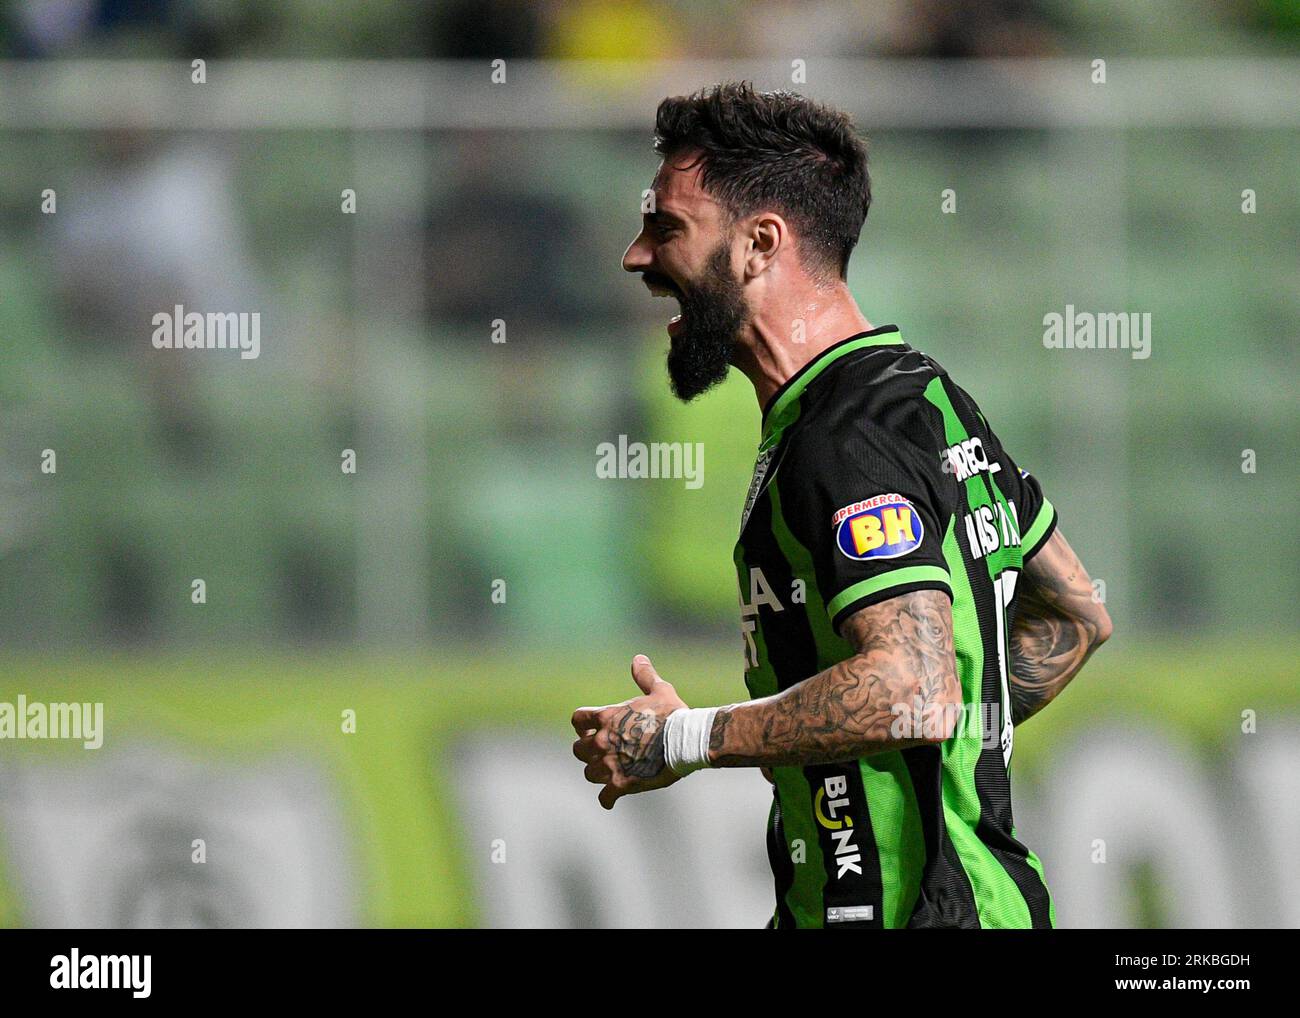 Belo Horizonte, Brazil. 24th Aug, 2023. Gonzalo Mastriani do America Mineiro, celebrates after scoring the first goal of his team during the match between America Mineiro and Fortaleza for the 1st leg of quarterfinals of Copa Conmebol Sudamericana 2023, at Arena Independencia Stadium, in Belo Horizonte, Brazil on August 24. Photo: Gledston Tavares/DiaEsportivo/Alamy Live News Credit: DiaEsportivo/Alamy Live News Stock Photo